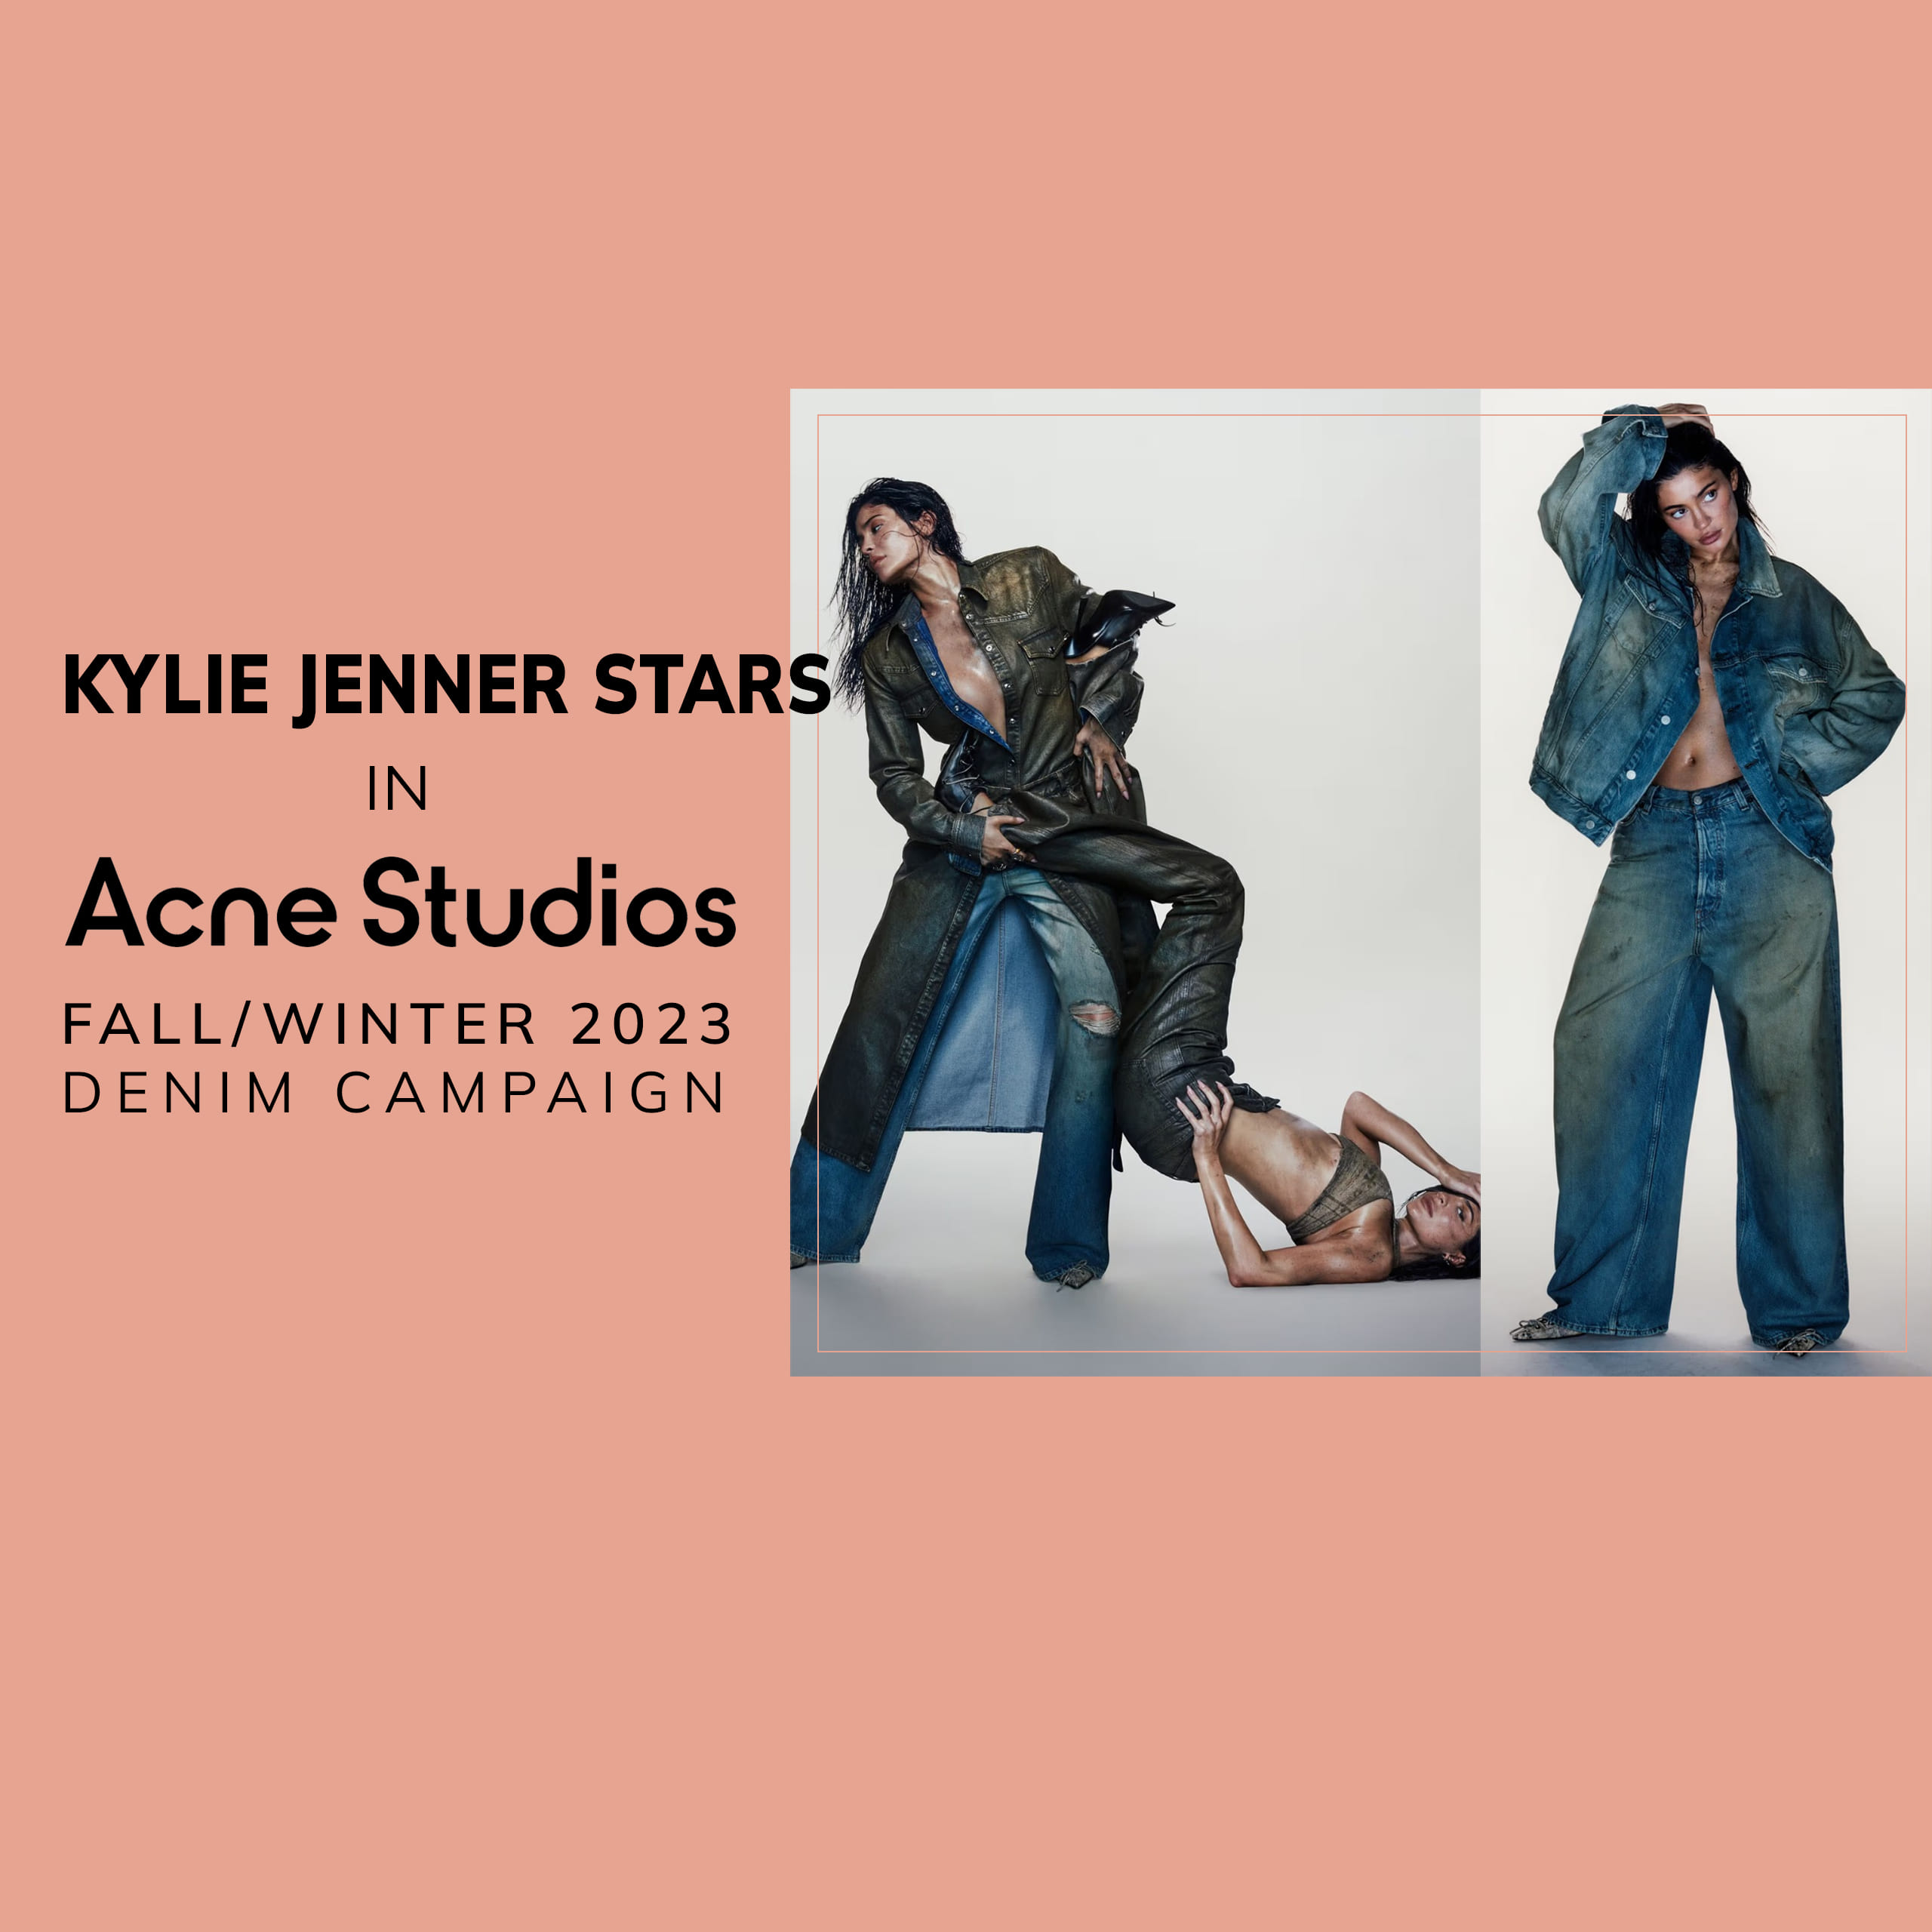 Kylie Jenner Stars in Acne Studios' Fall/Winter 2023 Denim Campaign ...